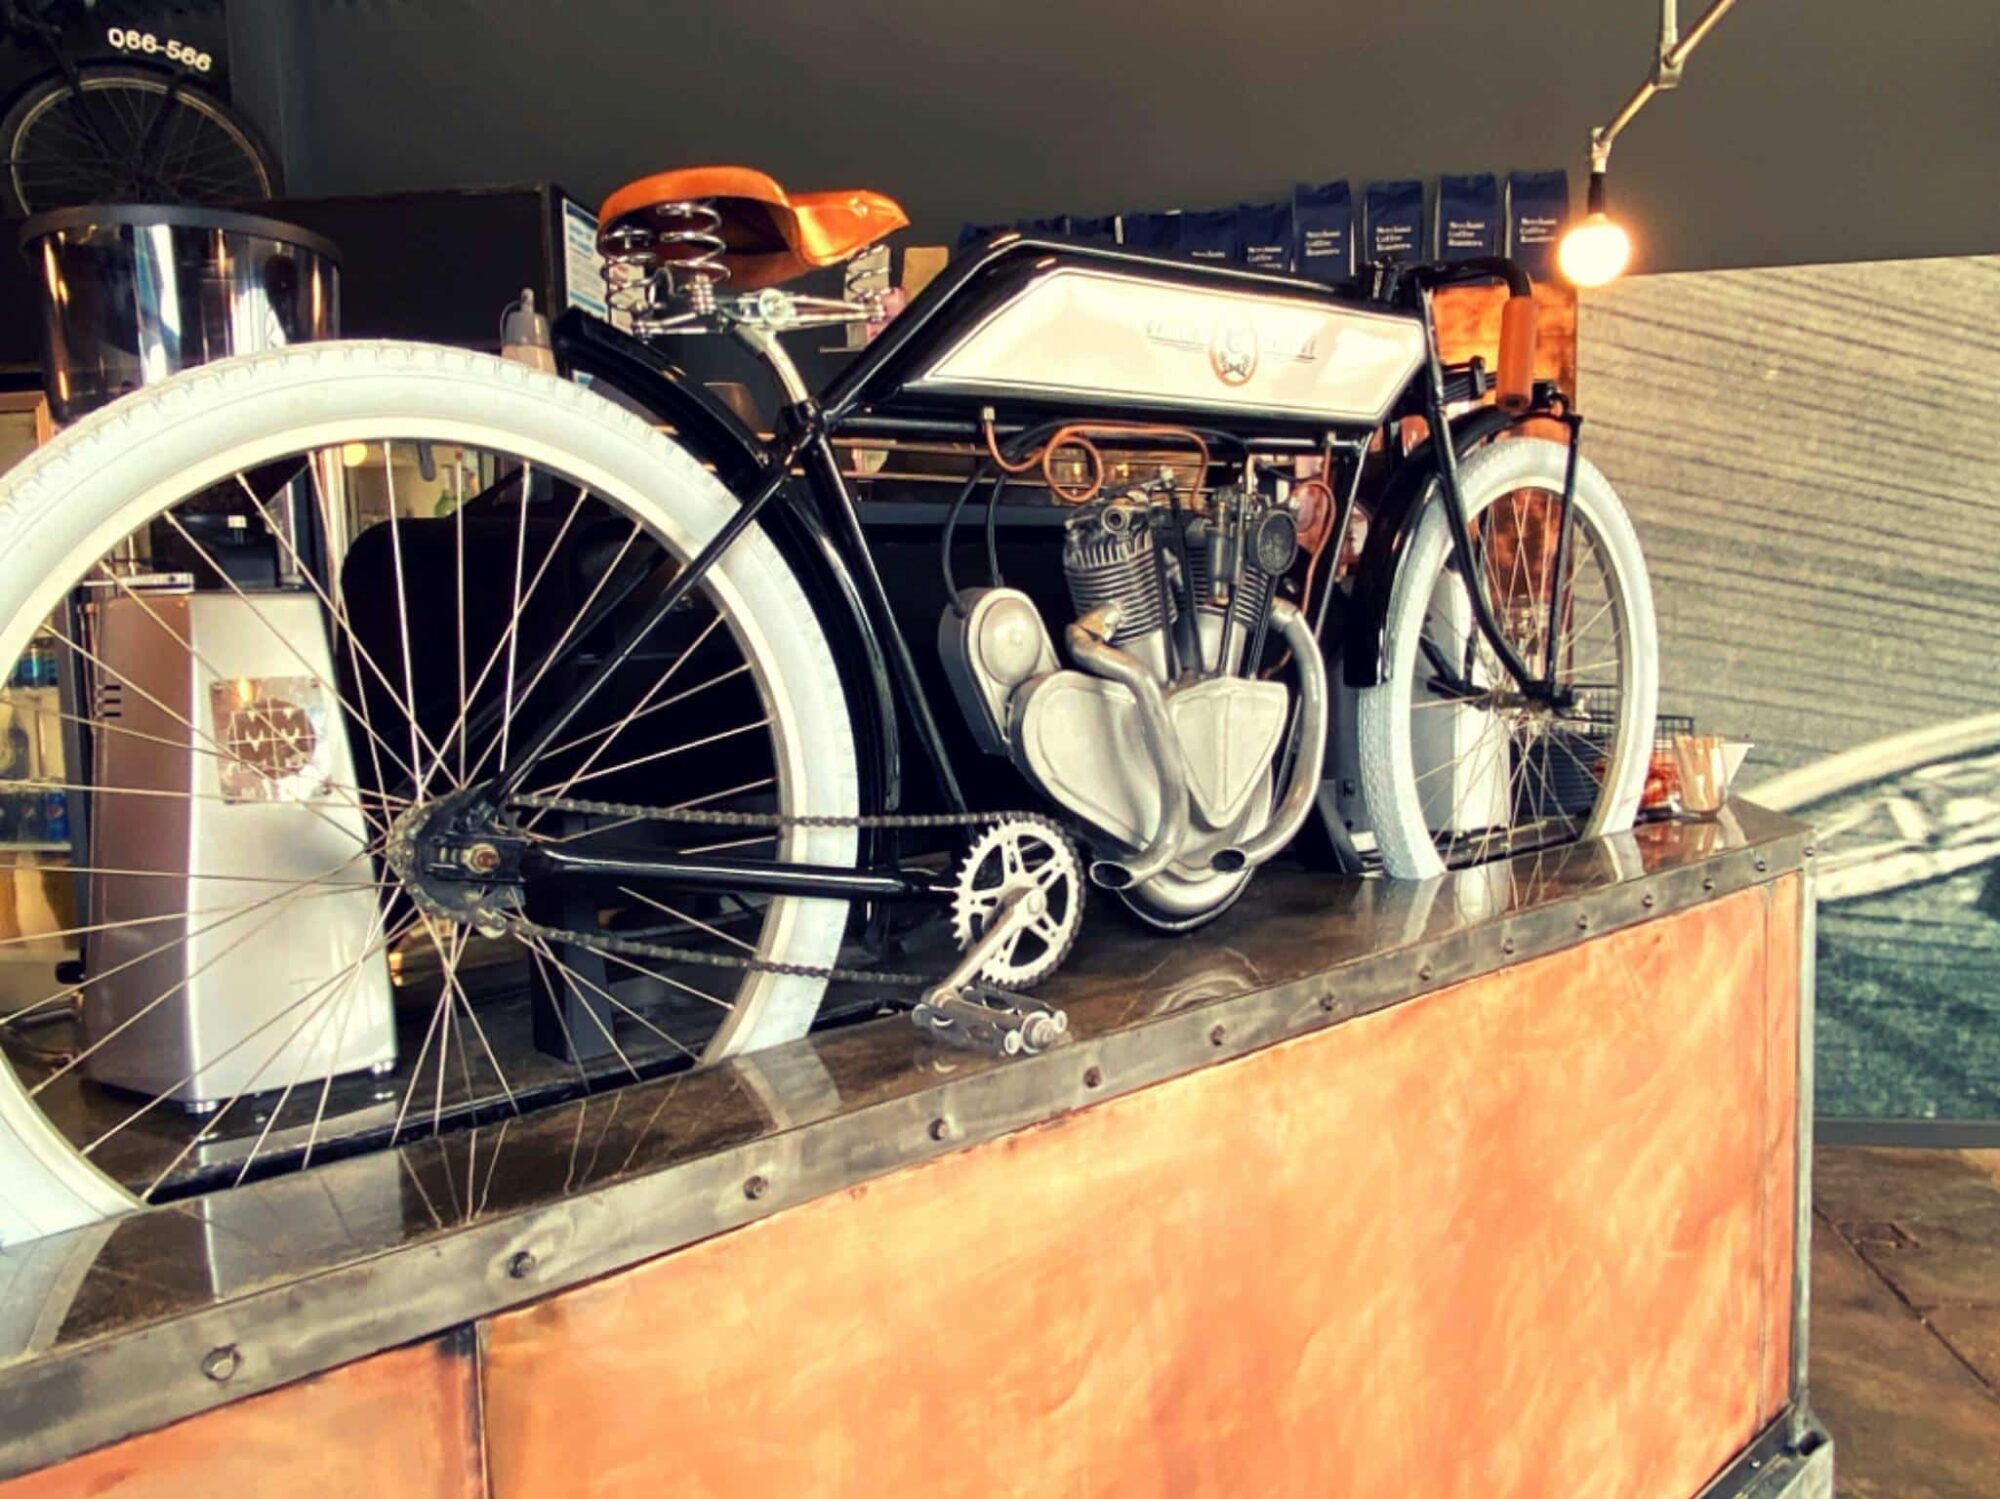 An artistic artwork of vintage motorcycle mounted on the bar